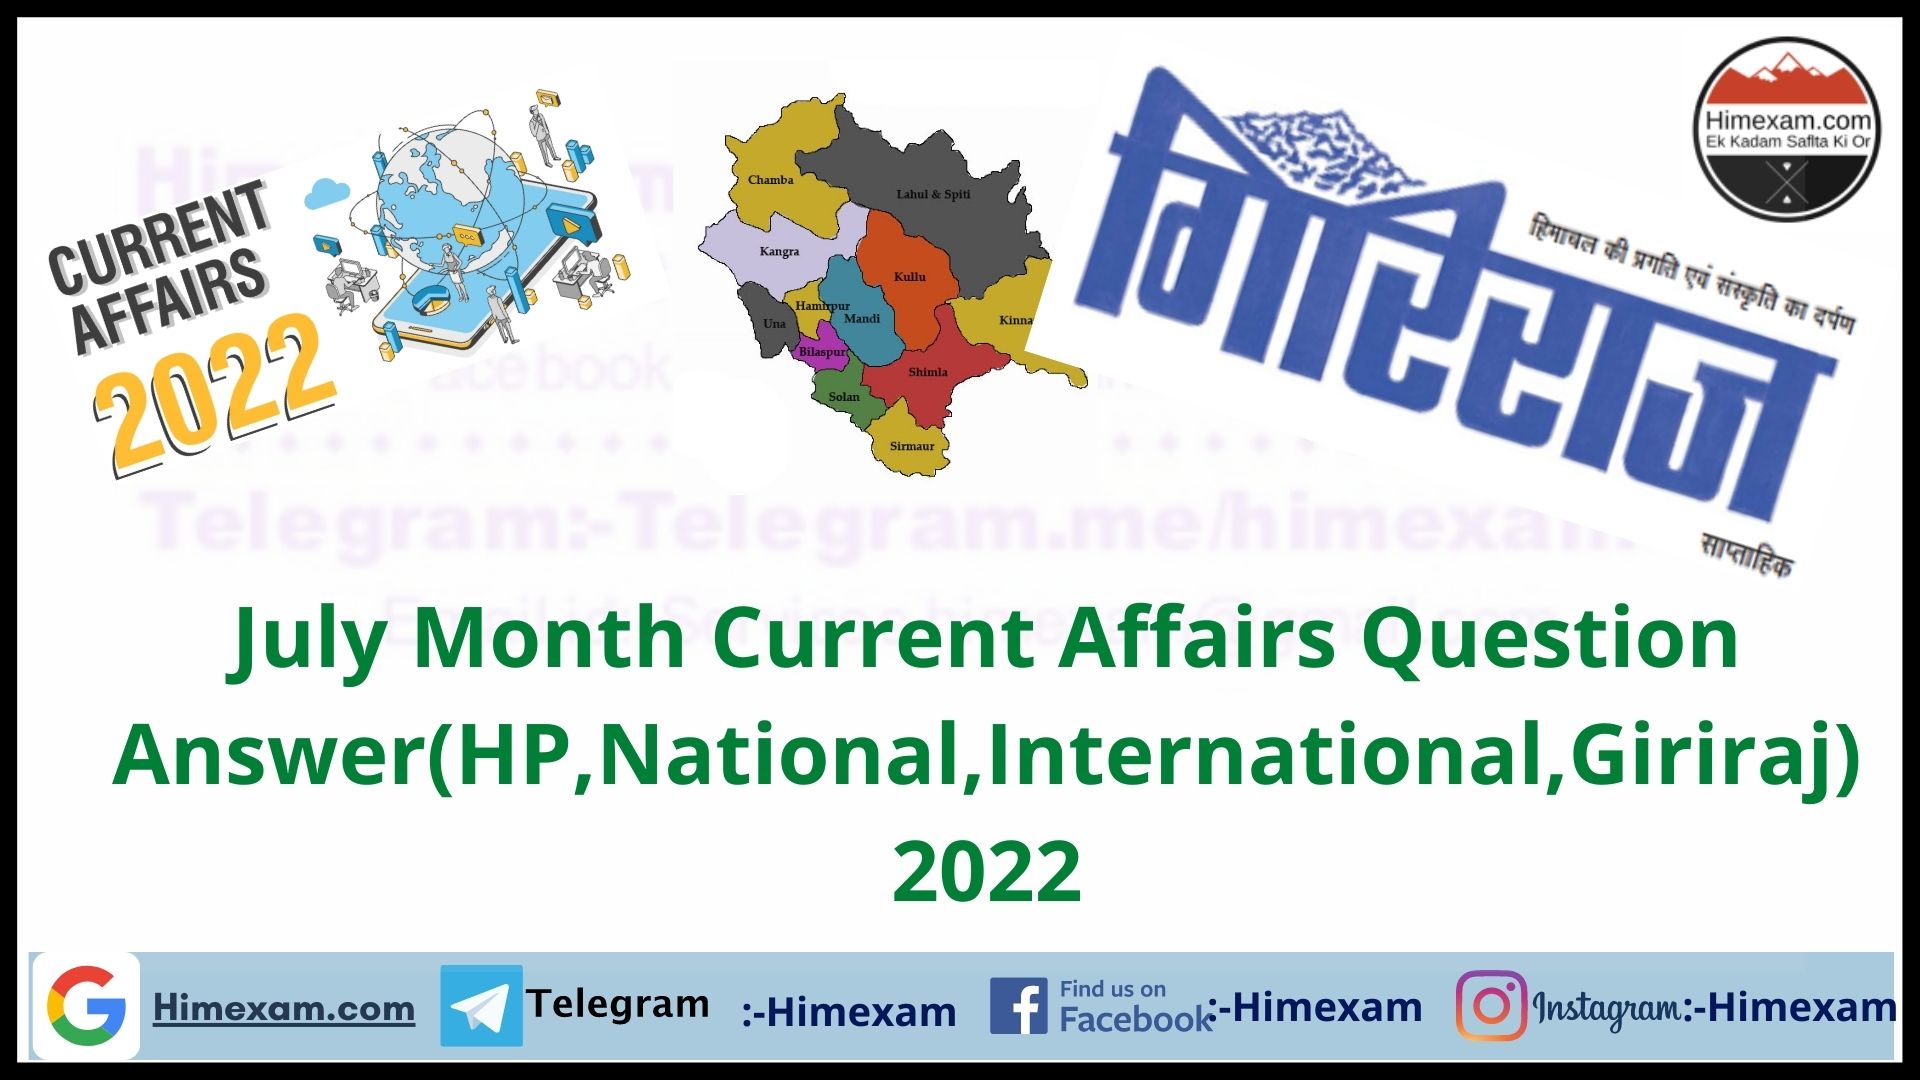 July Month Current Affairs Question Answer(HP,National,International,Giriraj) 2022